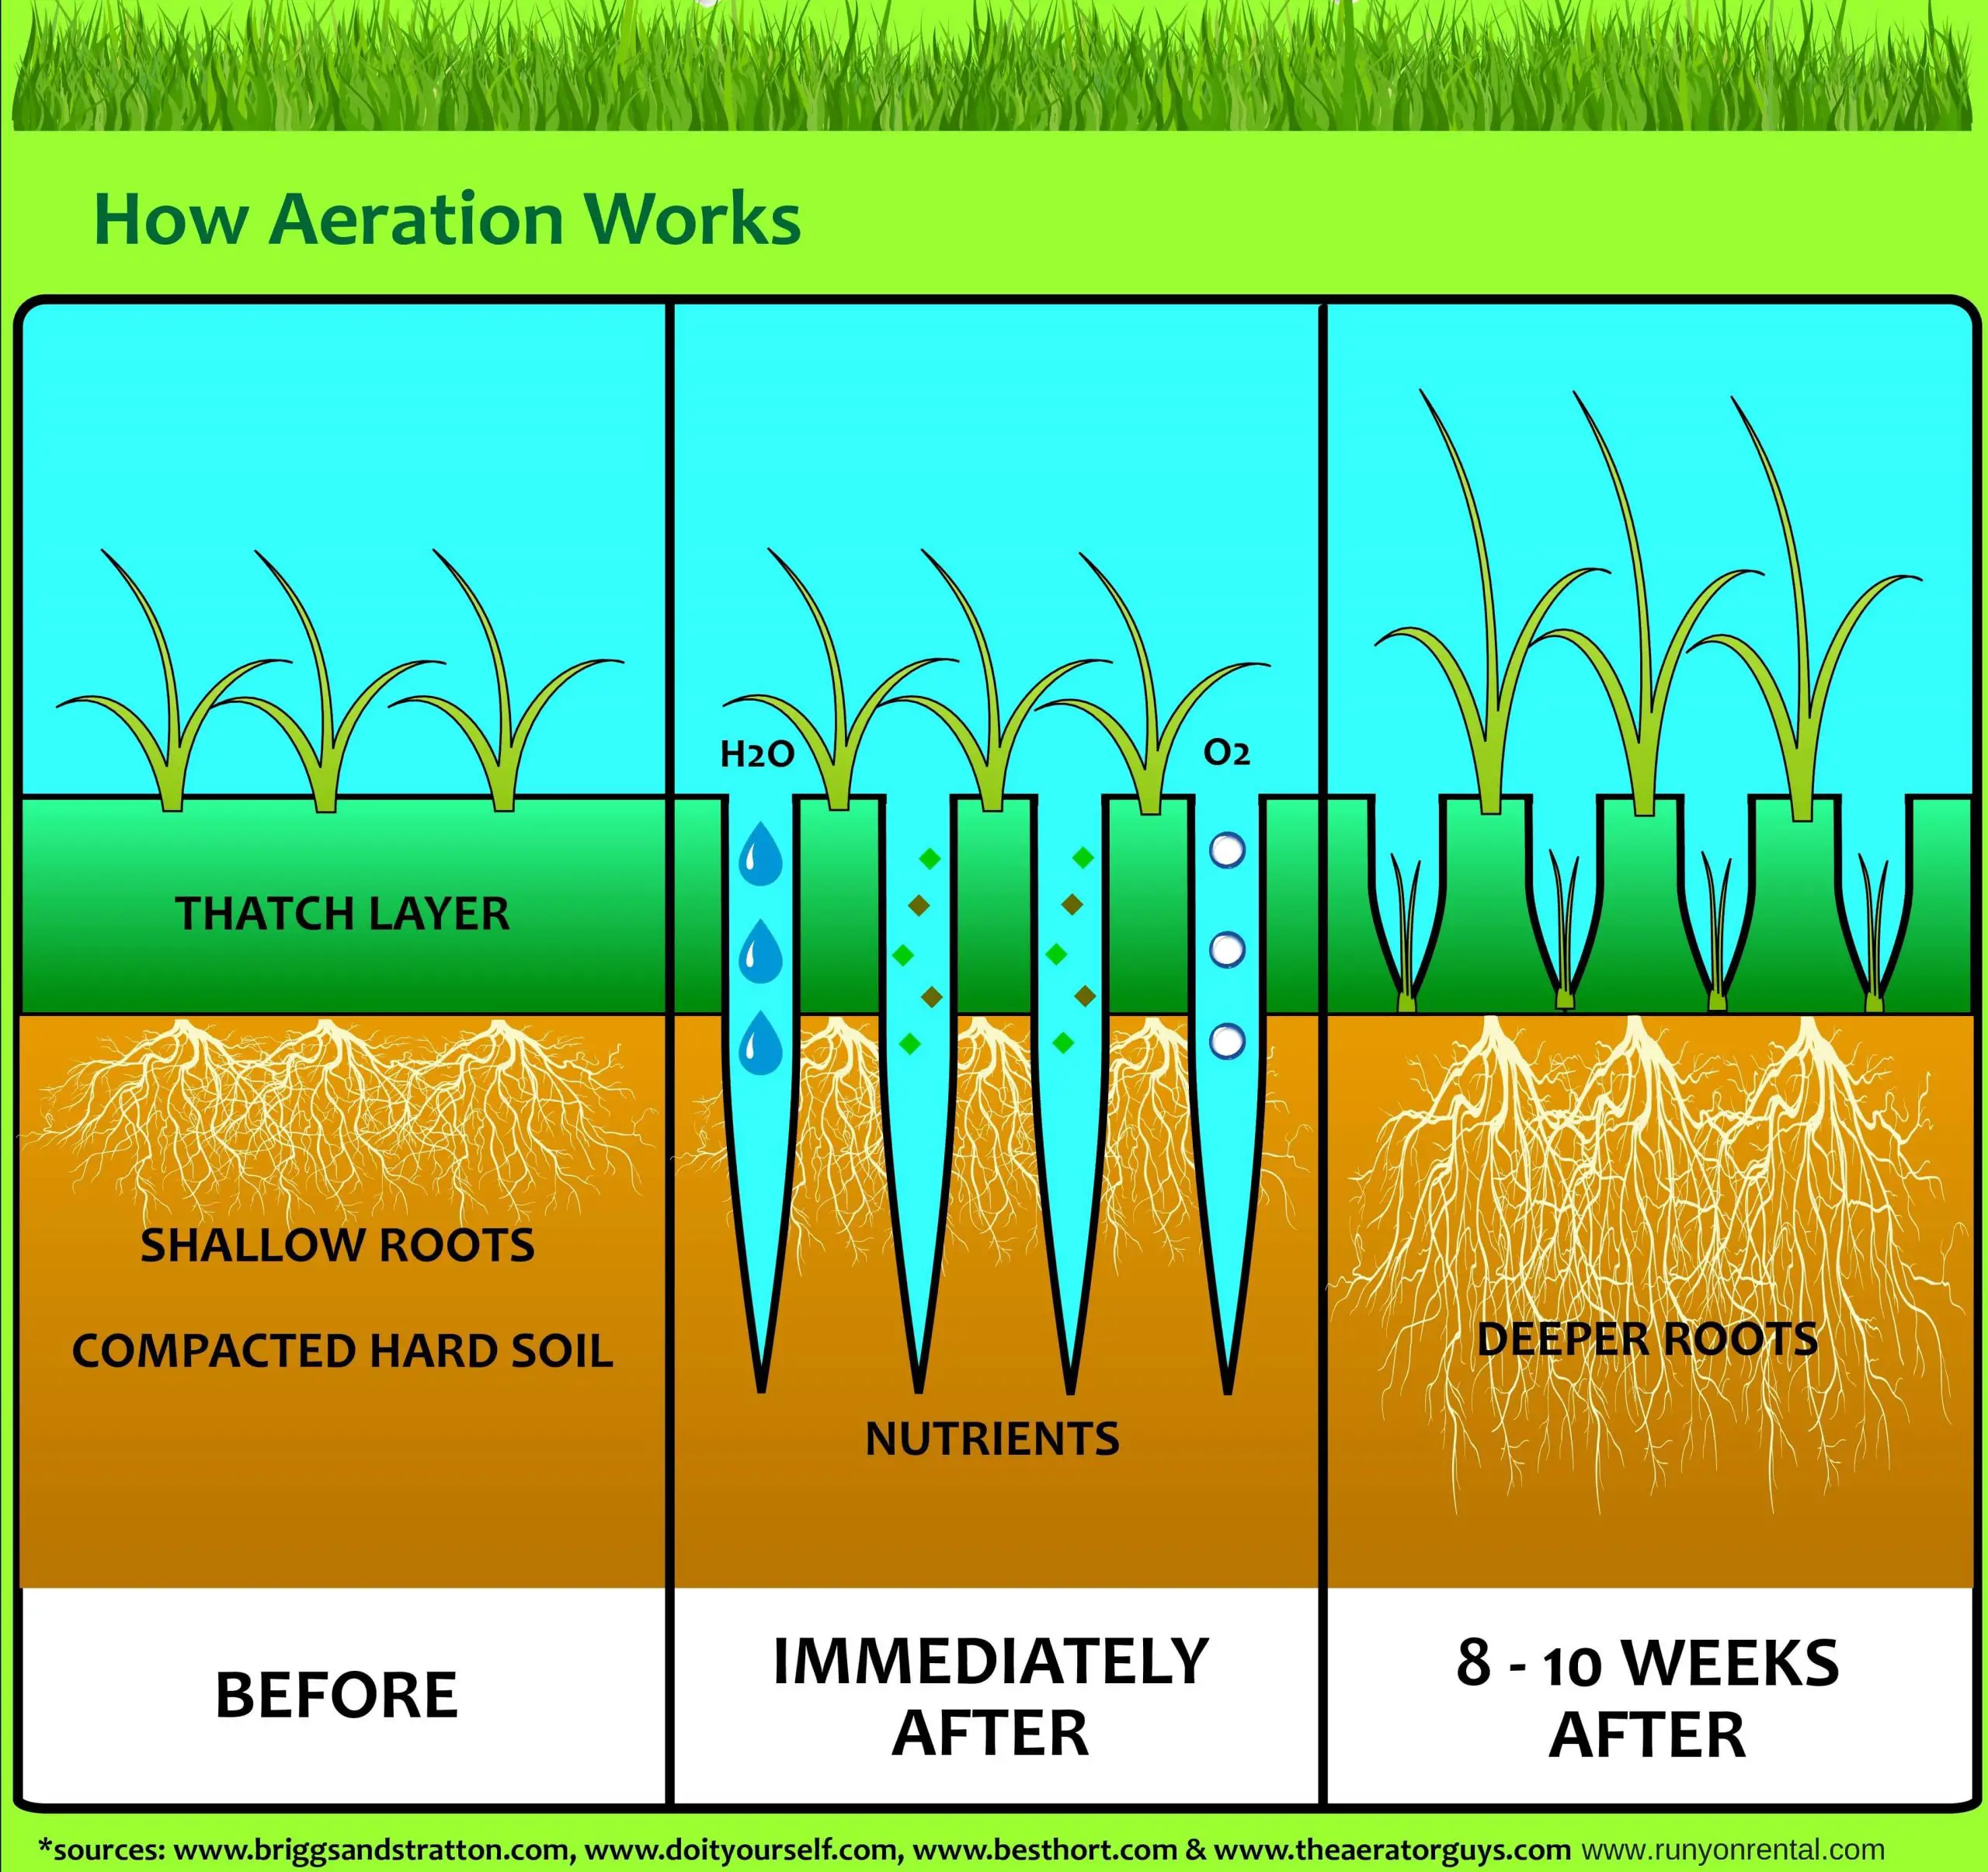 Benefits of core aeration for lawns